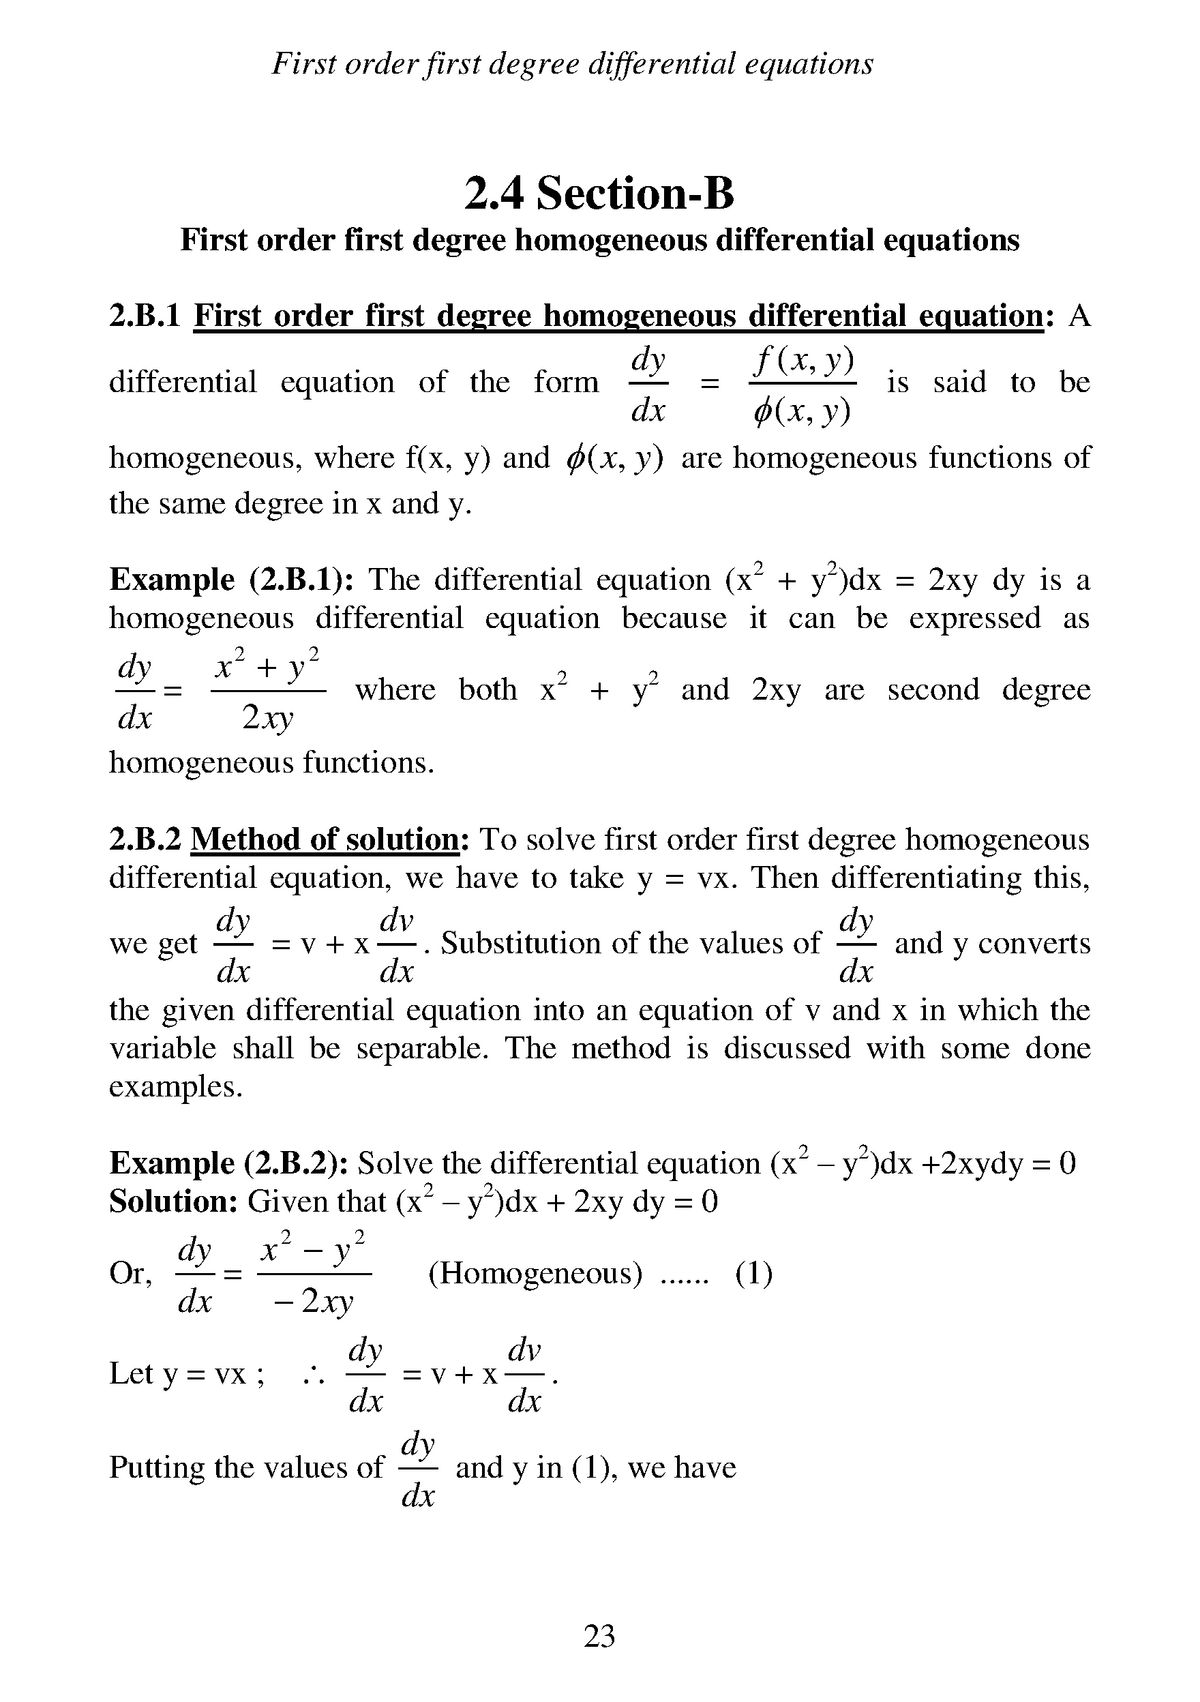 02b First Order First Degree Homogeneous First Order First Degree Differential Equations 2 4 Studocu